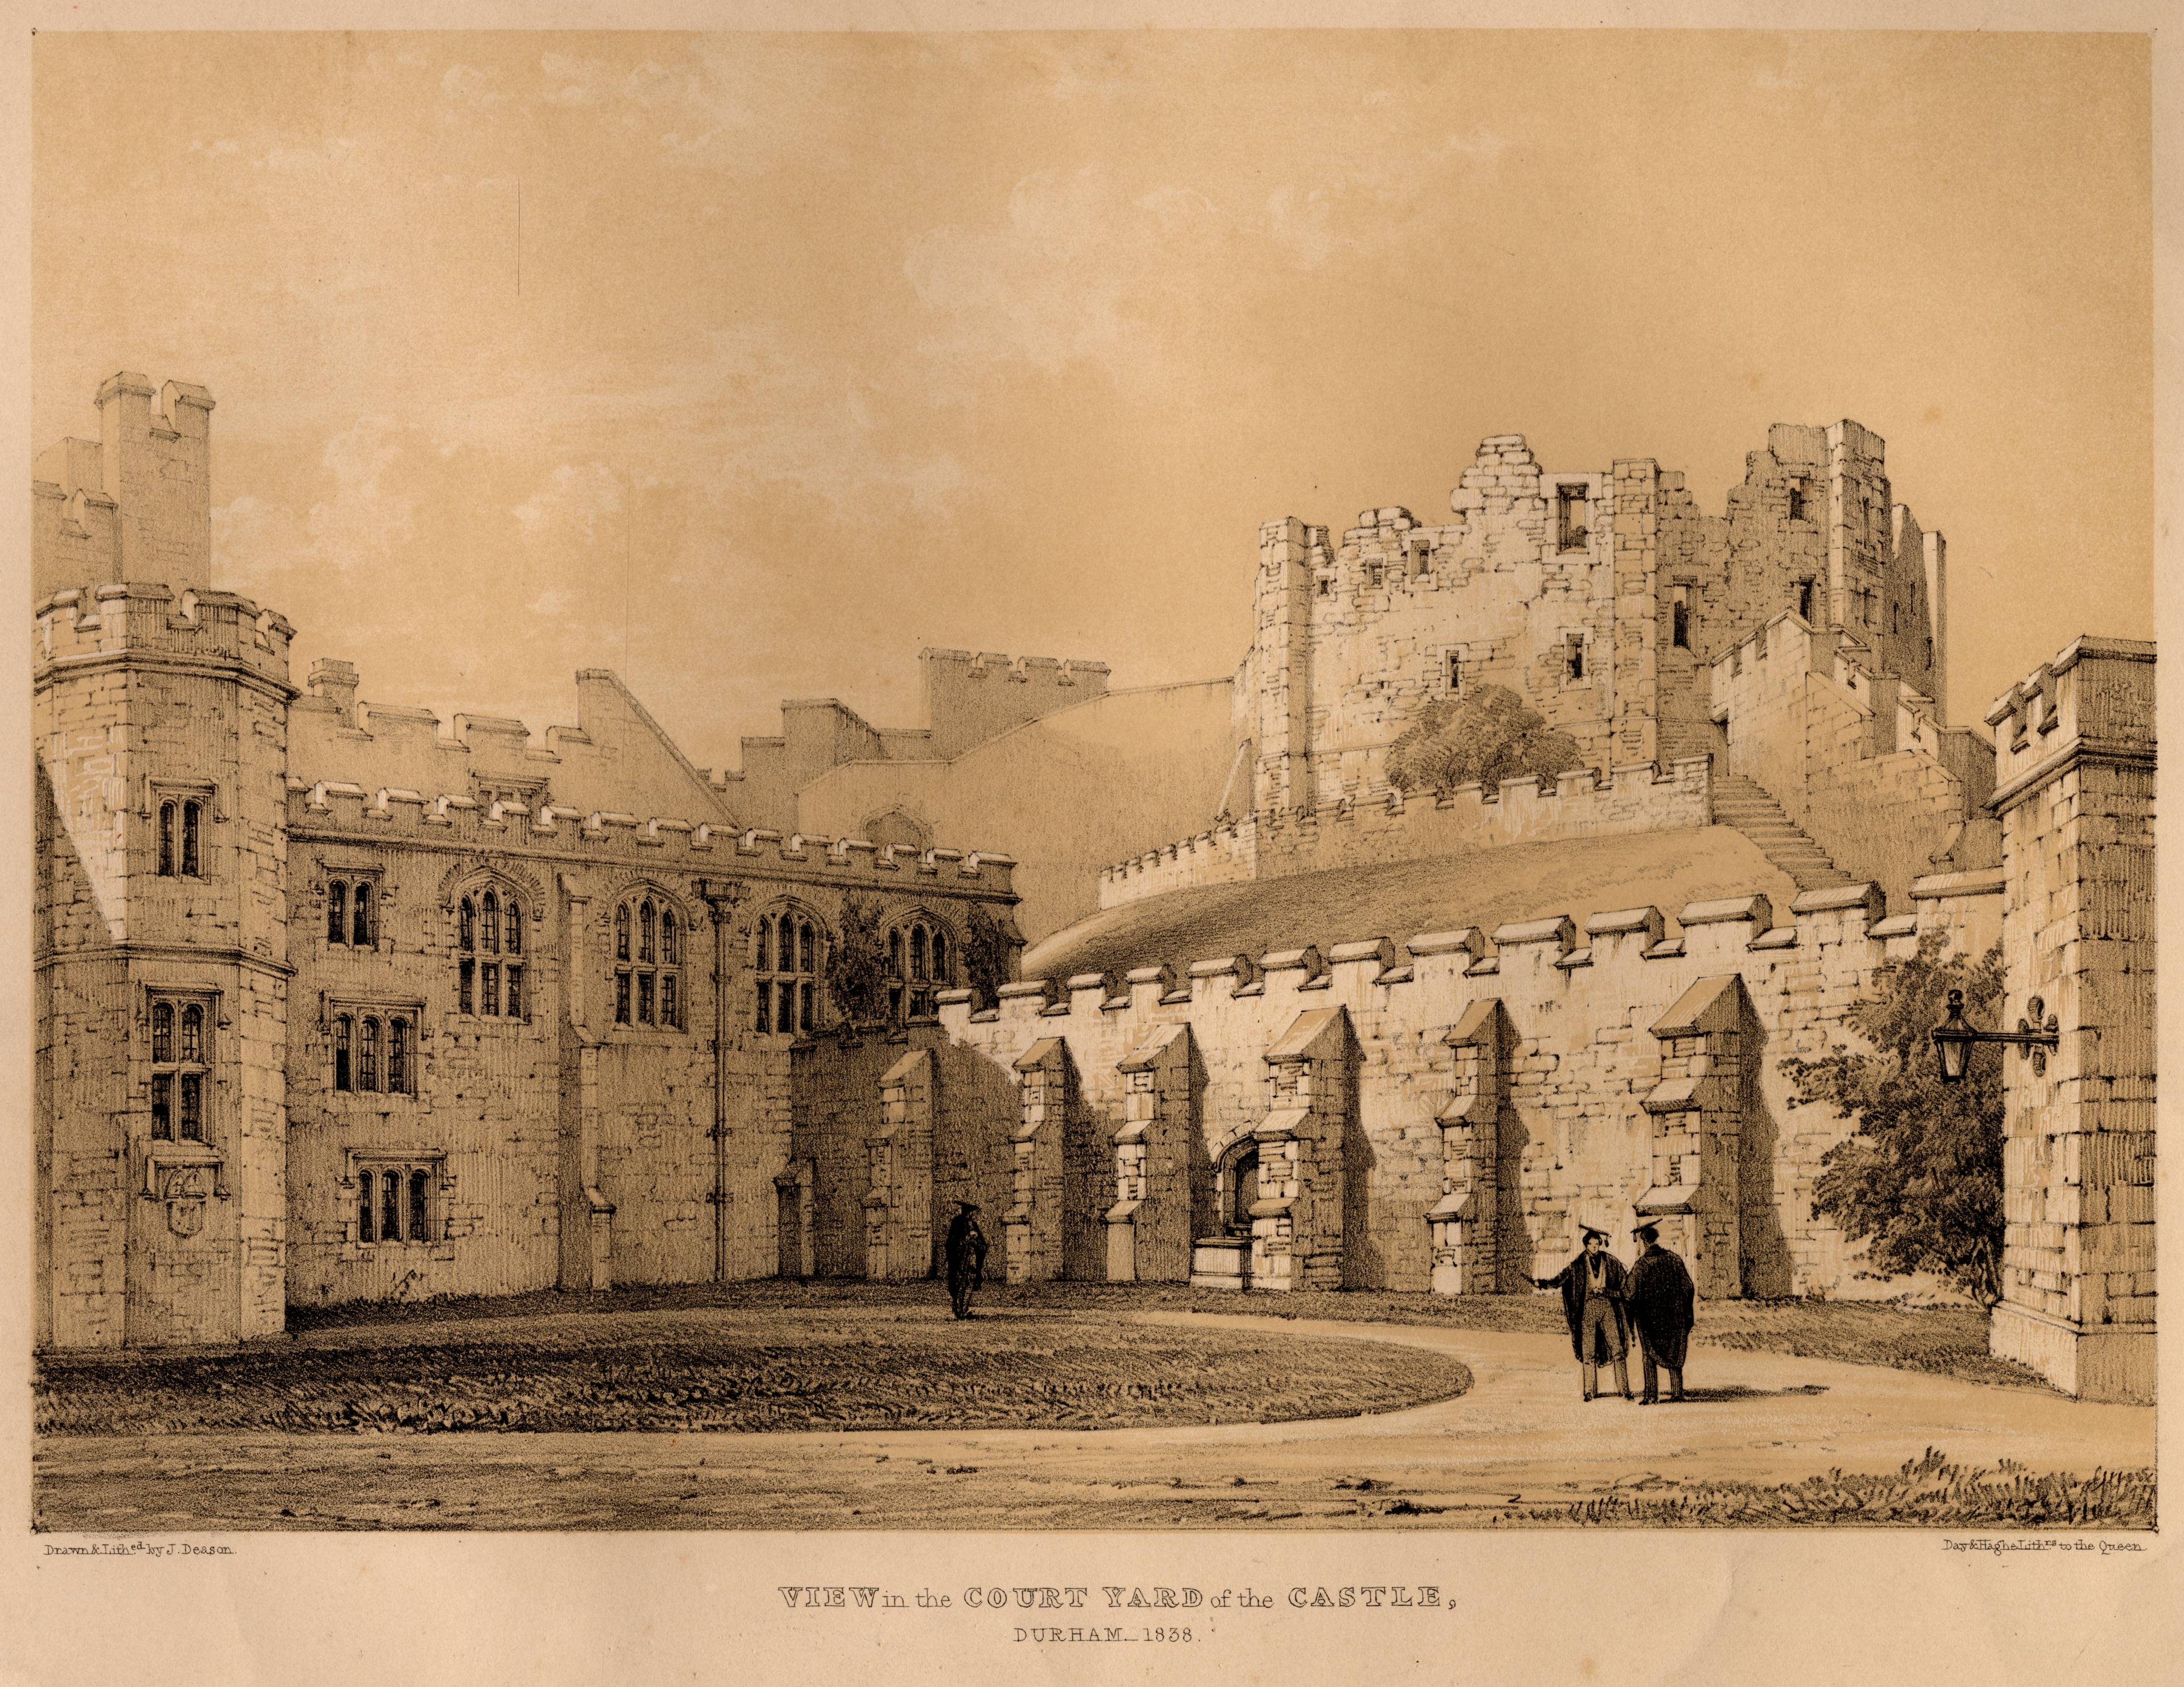 Durham Castle courtyard in 1838, showing the ruined keep prior to rebuilding as Durham University accommodation